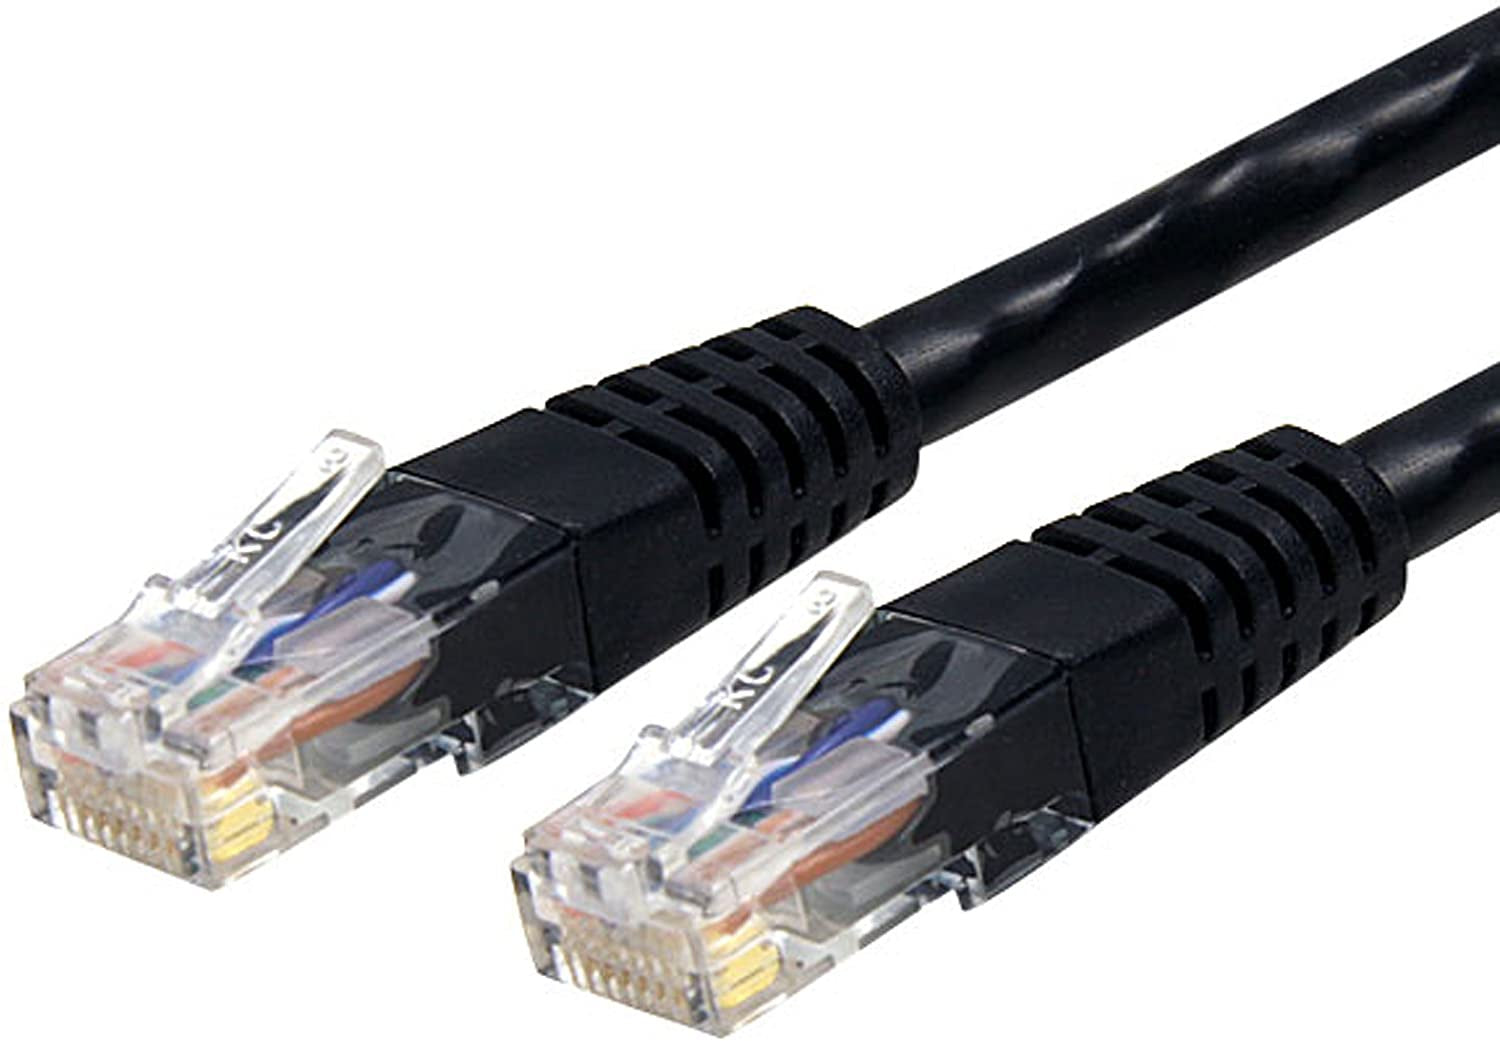 Networking LAN Cat6 24AWG Cable 8P8C 4 Twisted Pairs, Stranded Pure Copper 10 ft Ethernet Cable